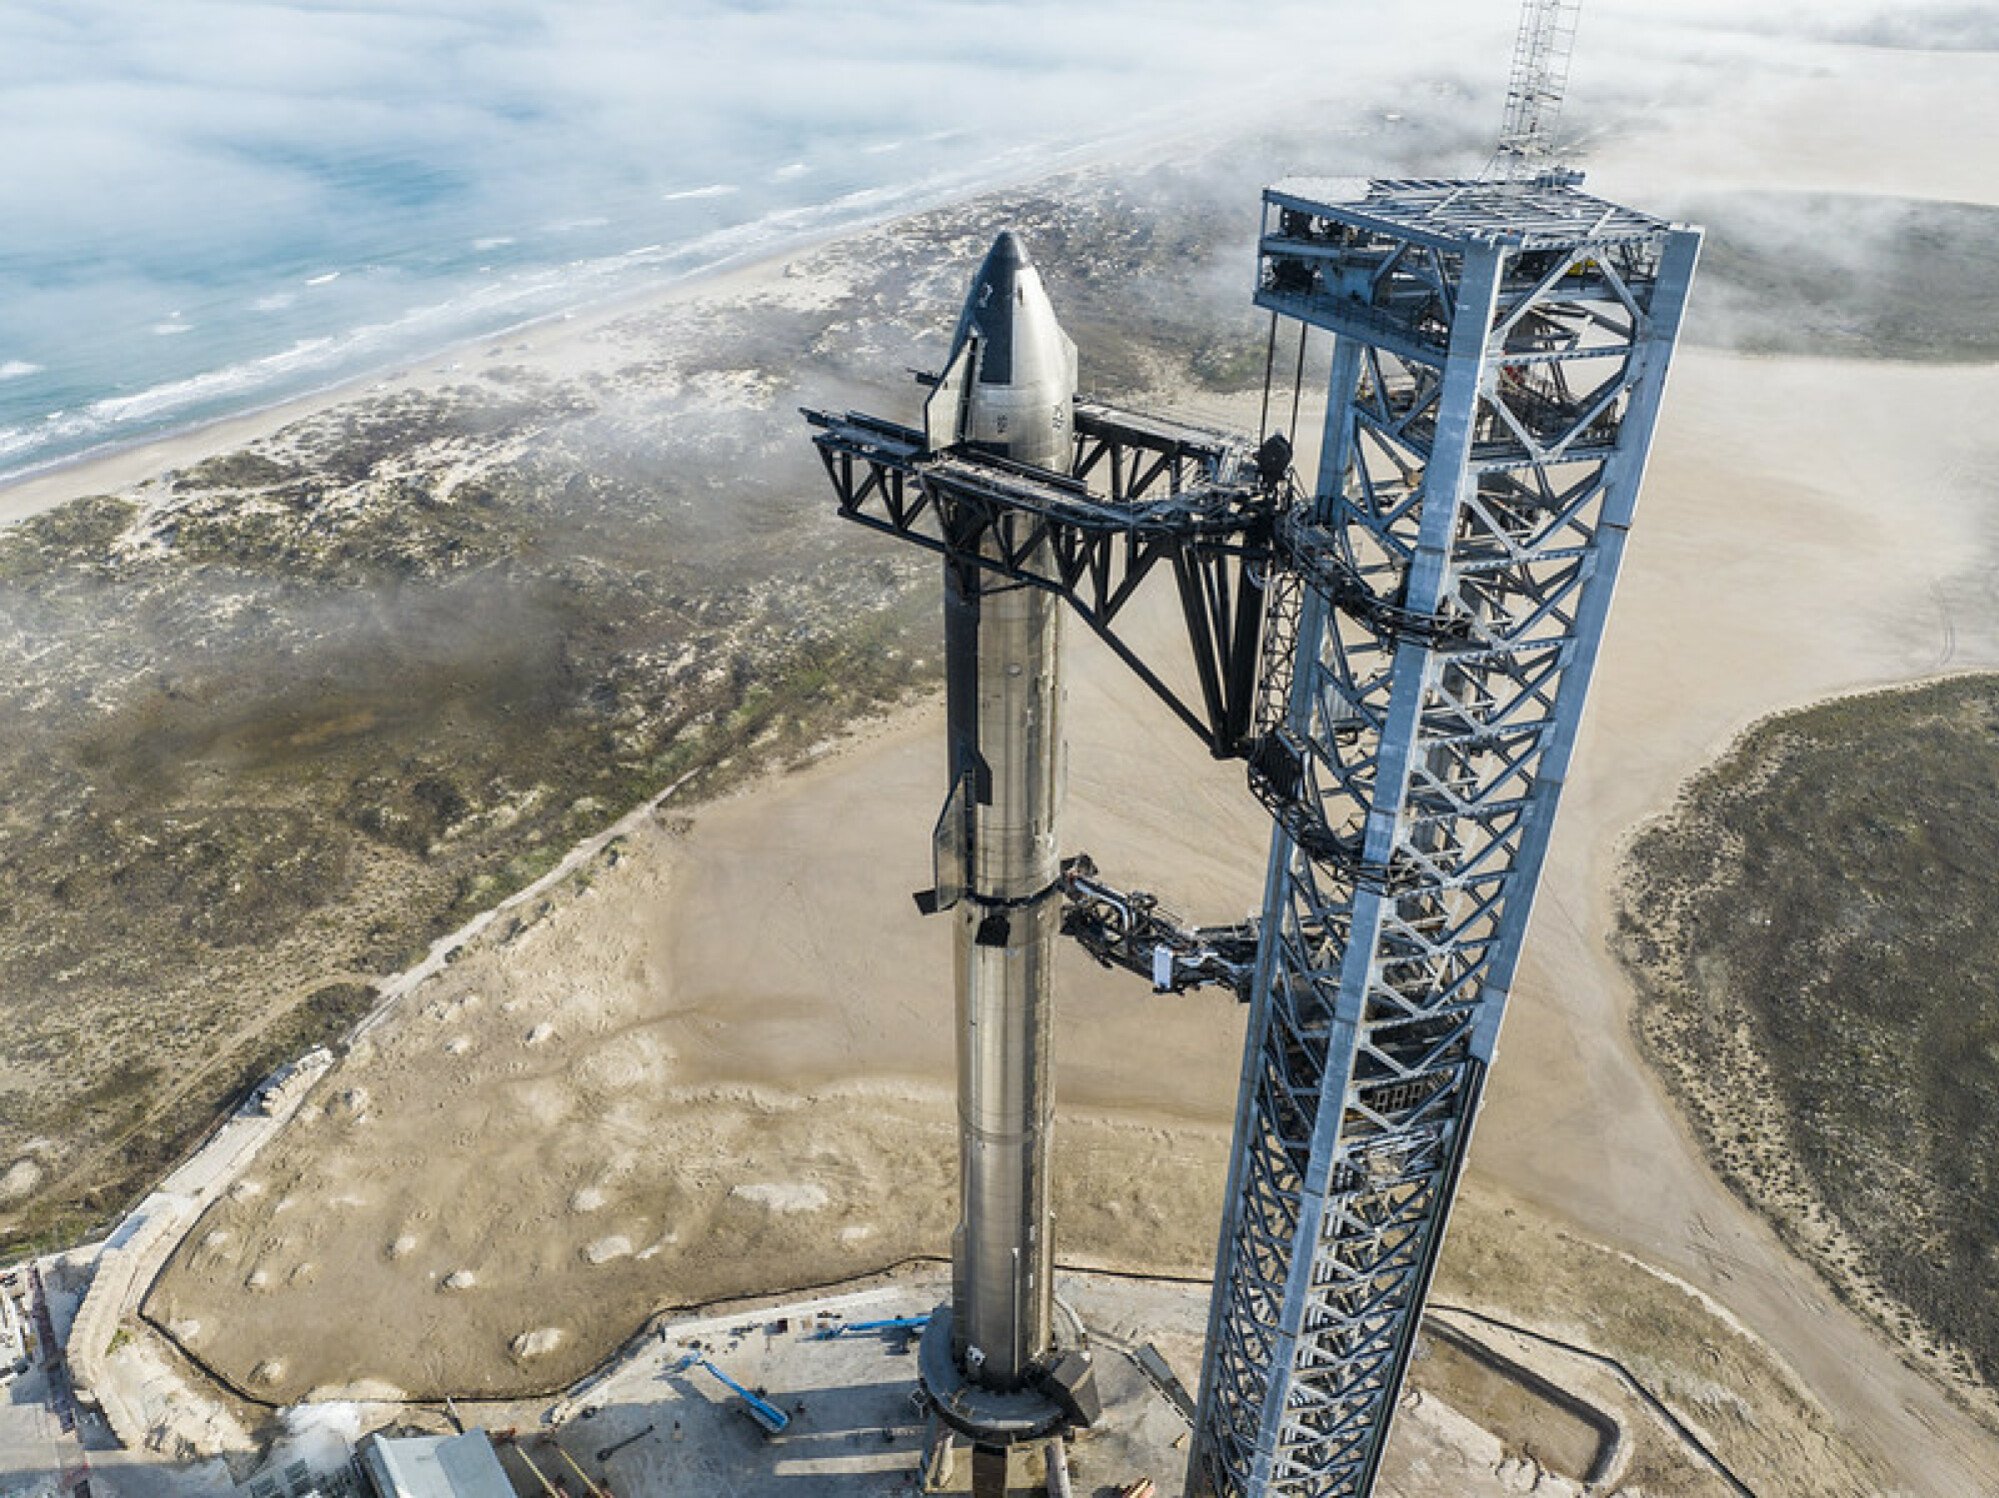 SpaceX stacking Starship at the launch pad